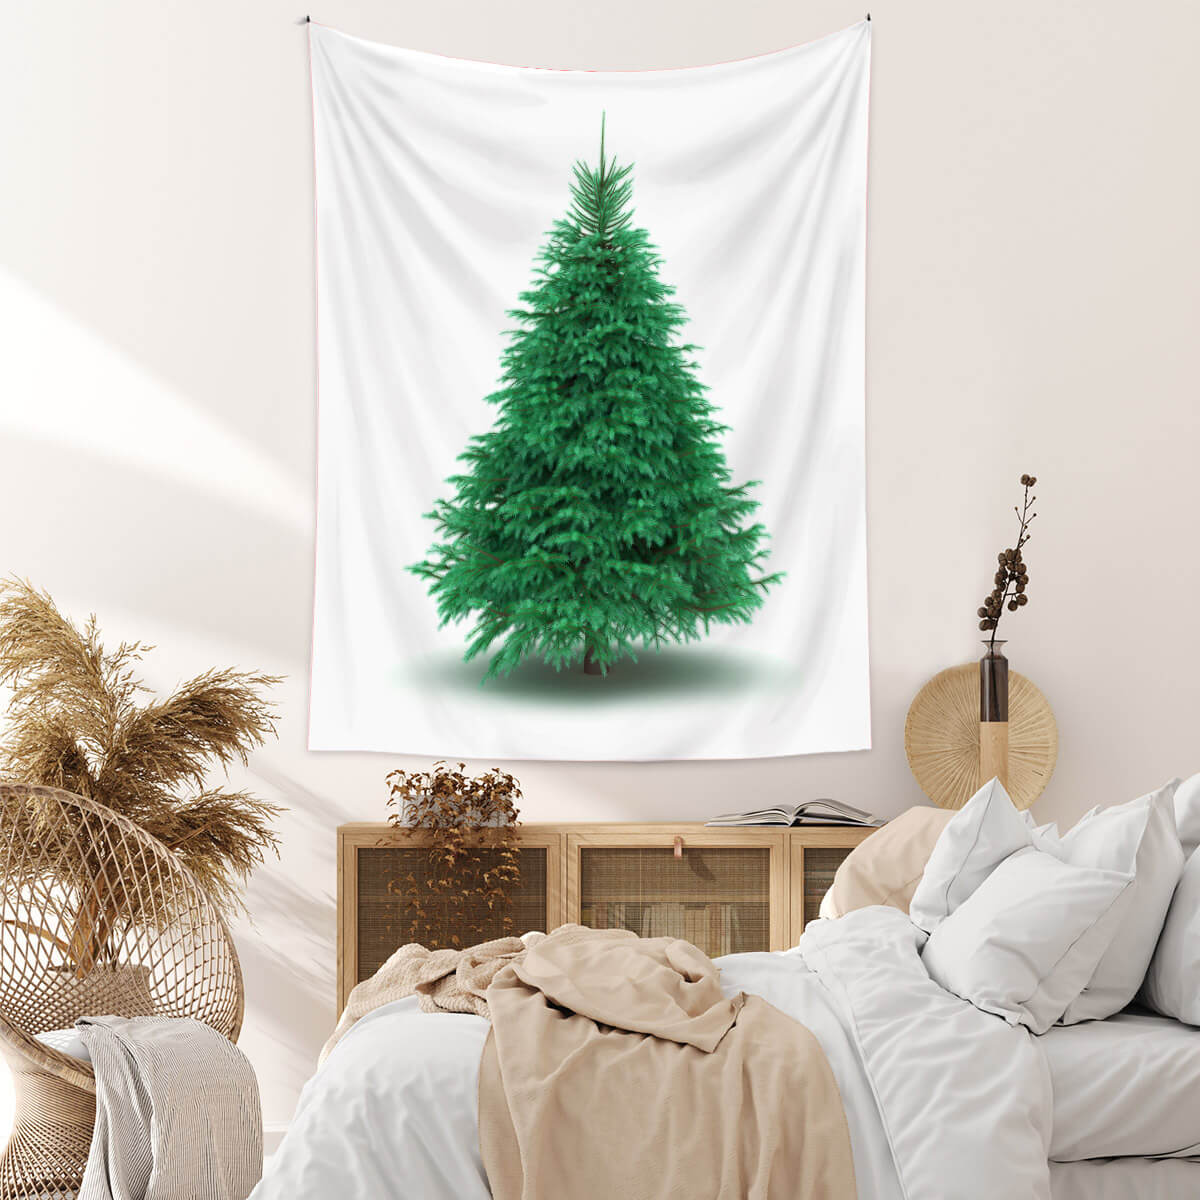 Aperturee - White And Green Art Decor Christmas Tree Wall Tapestry